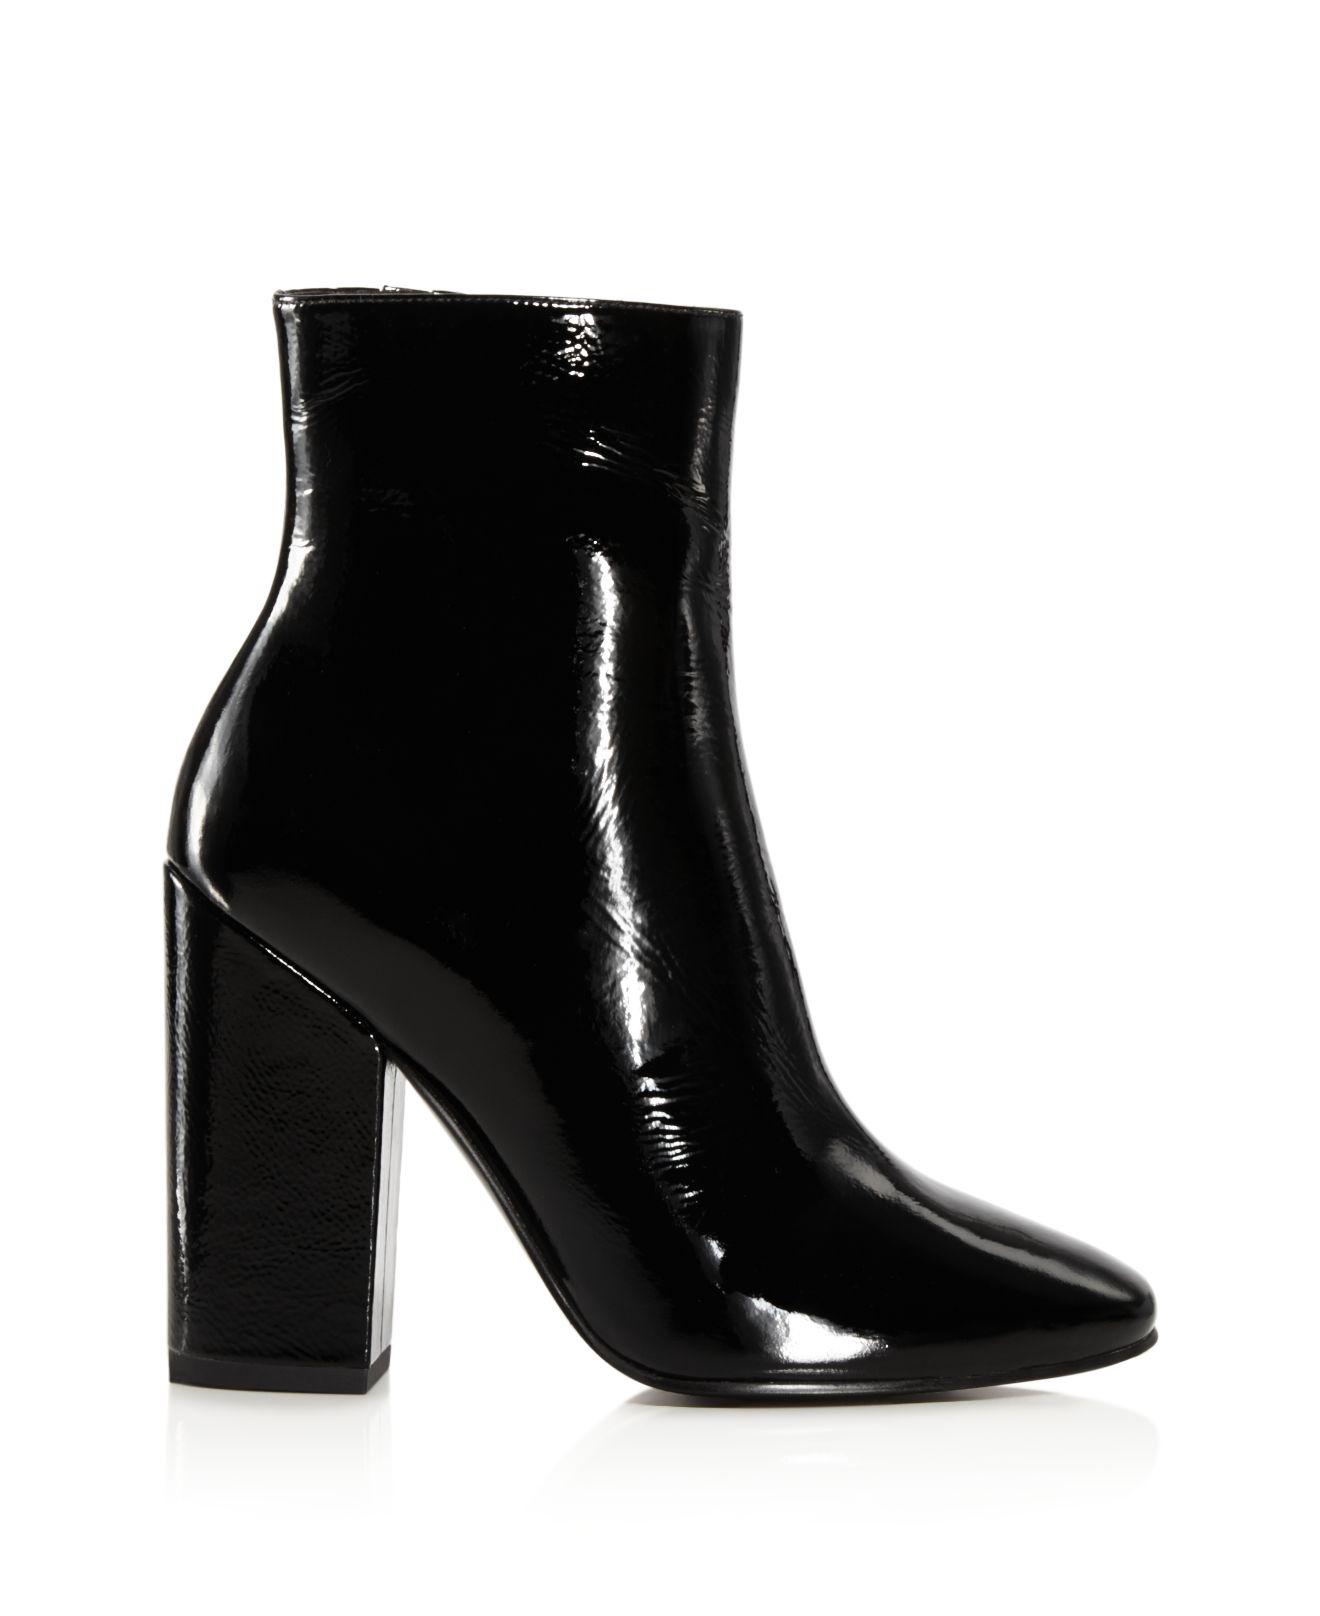 kendall and kylie patent leather boots